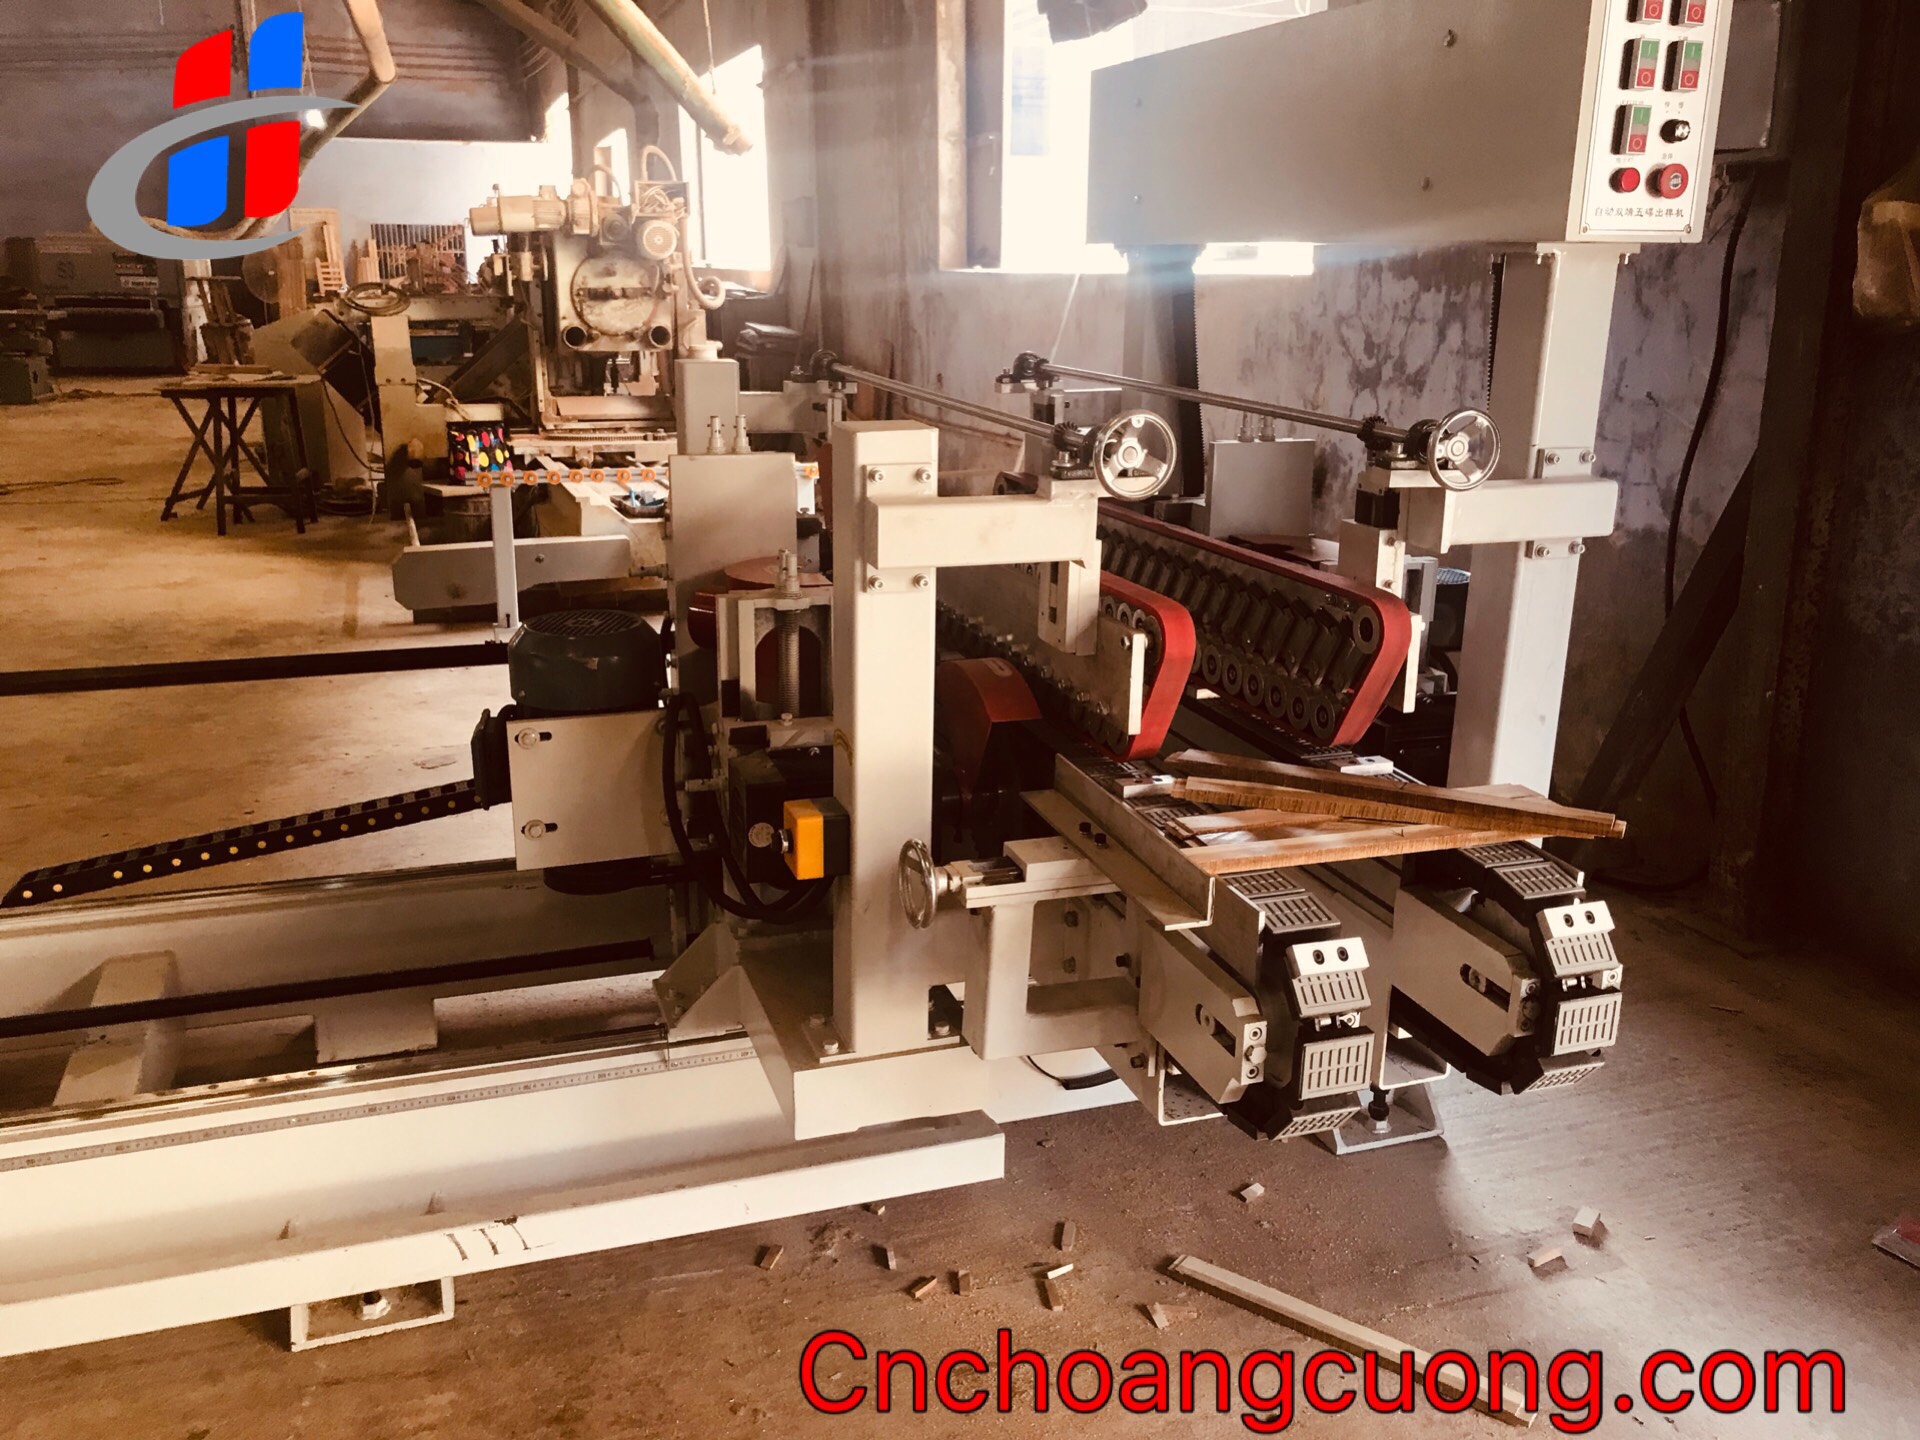 https://cnchoangcuong.com/?post_type=product&p=1328&preview=true